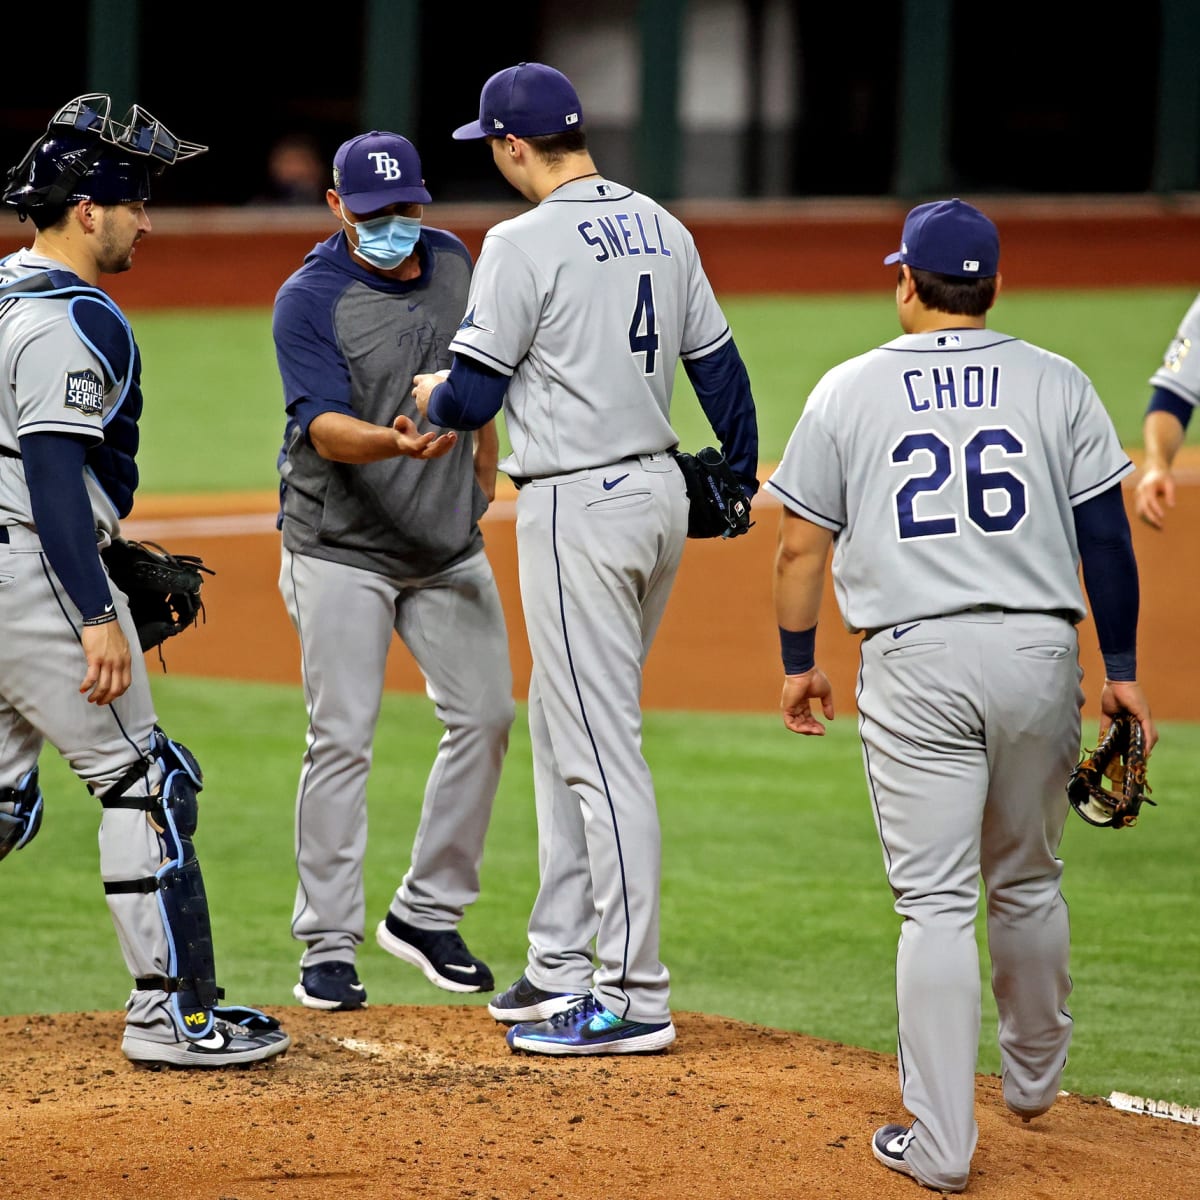 Dodgers win World Series after Rays' questionable Blake Snell decision